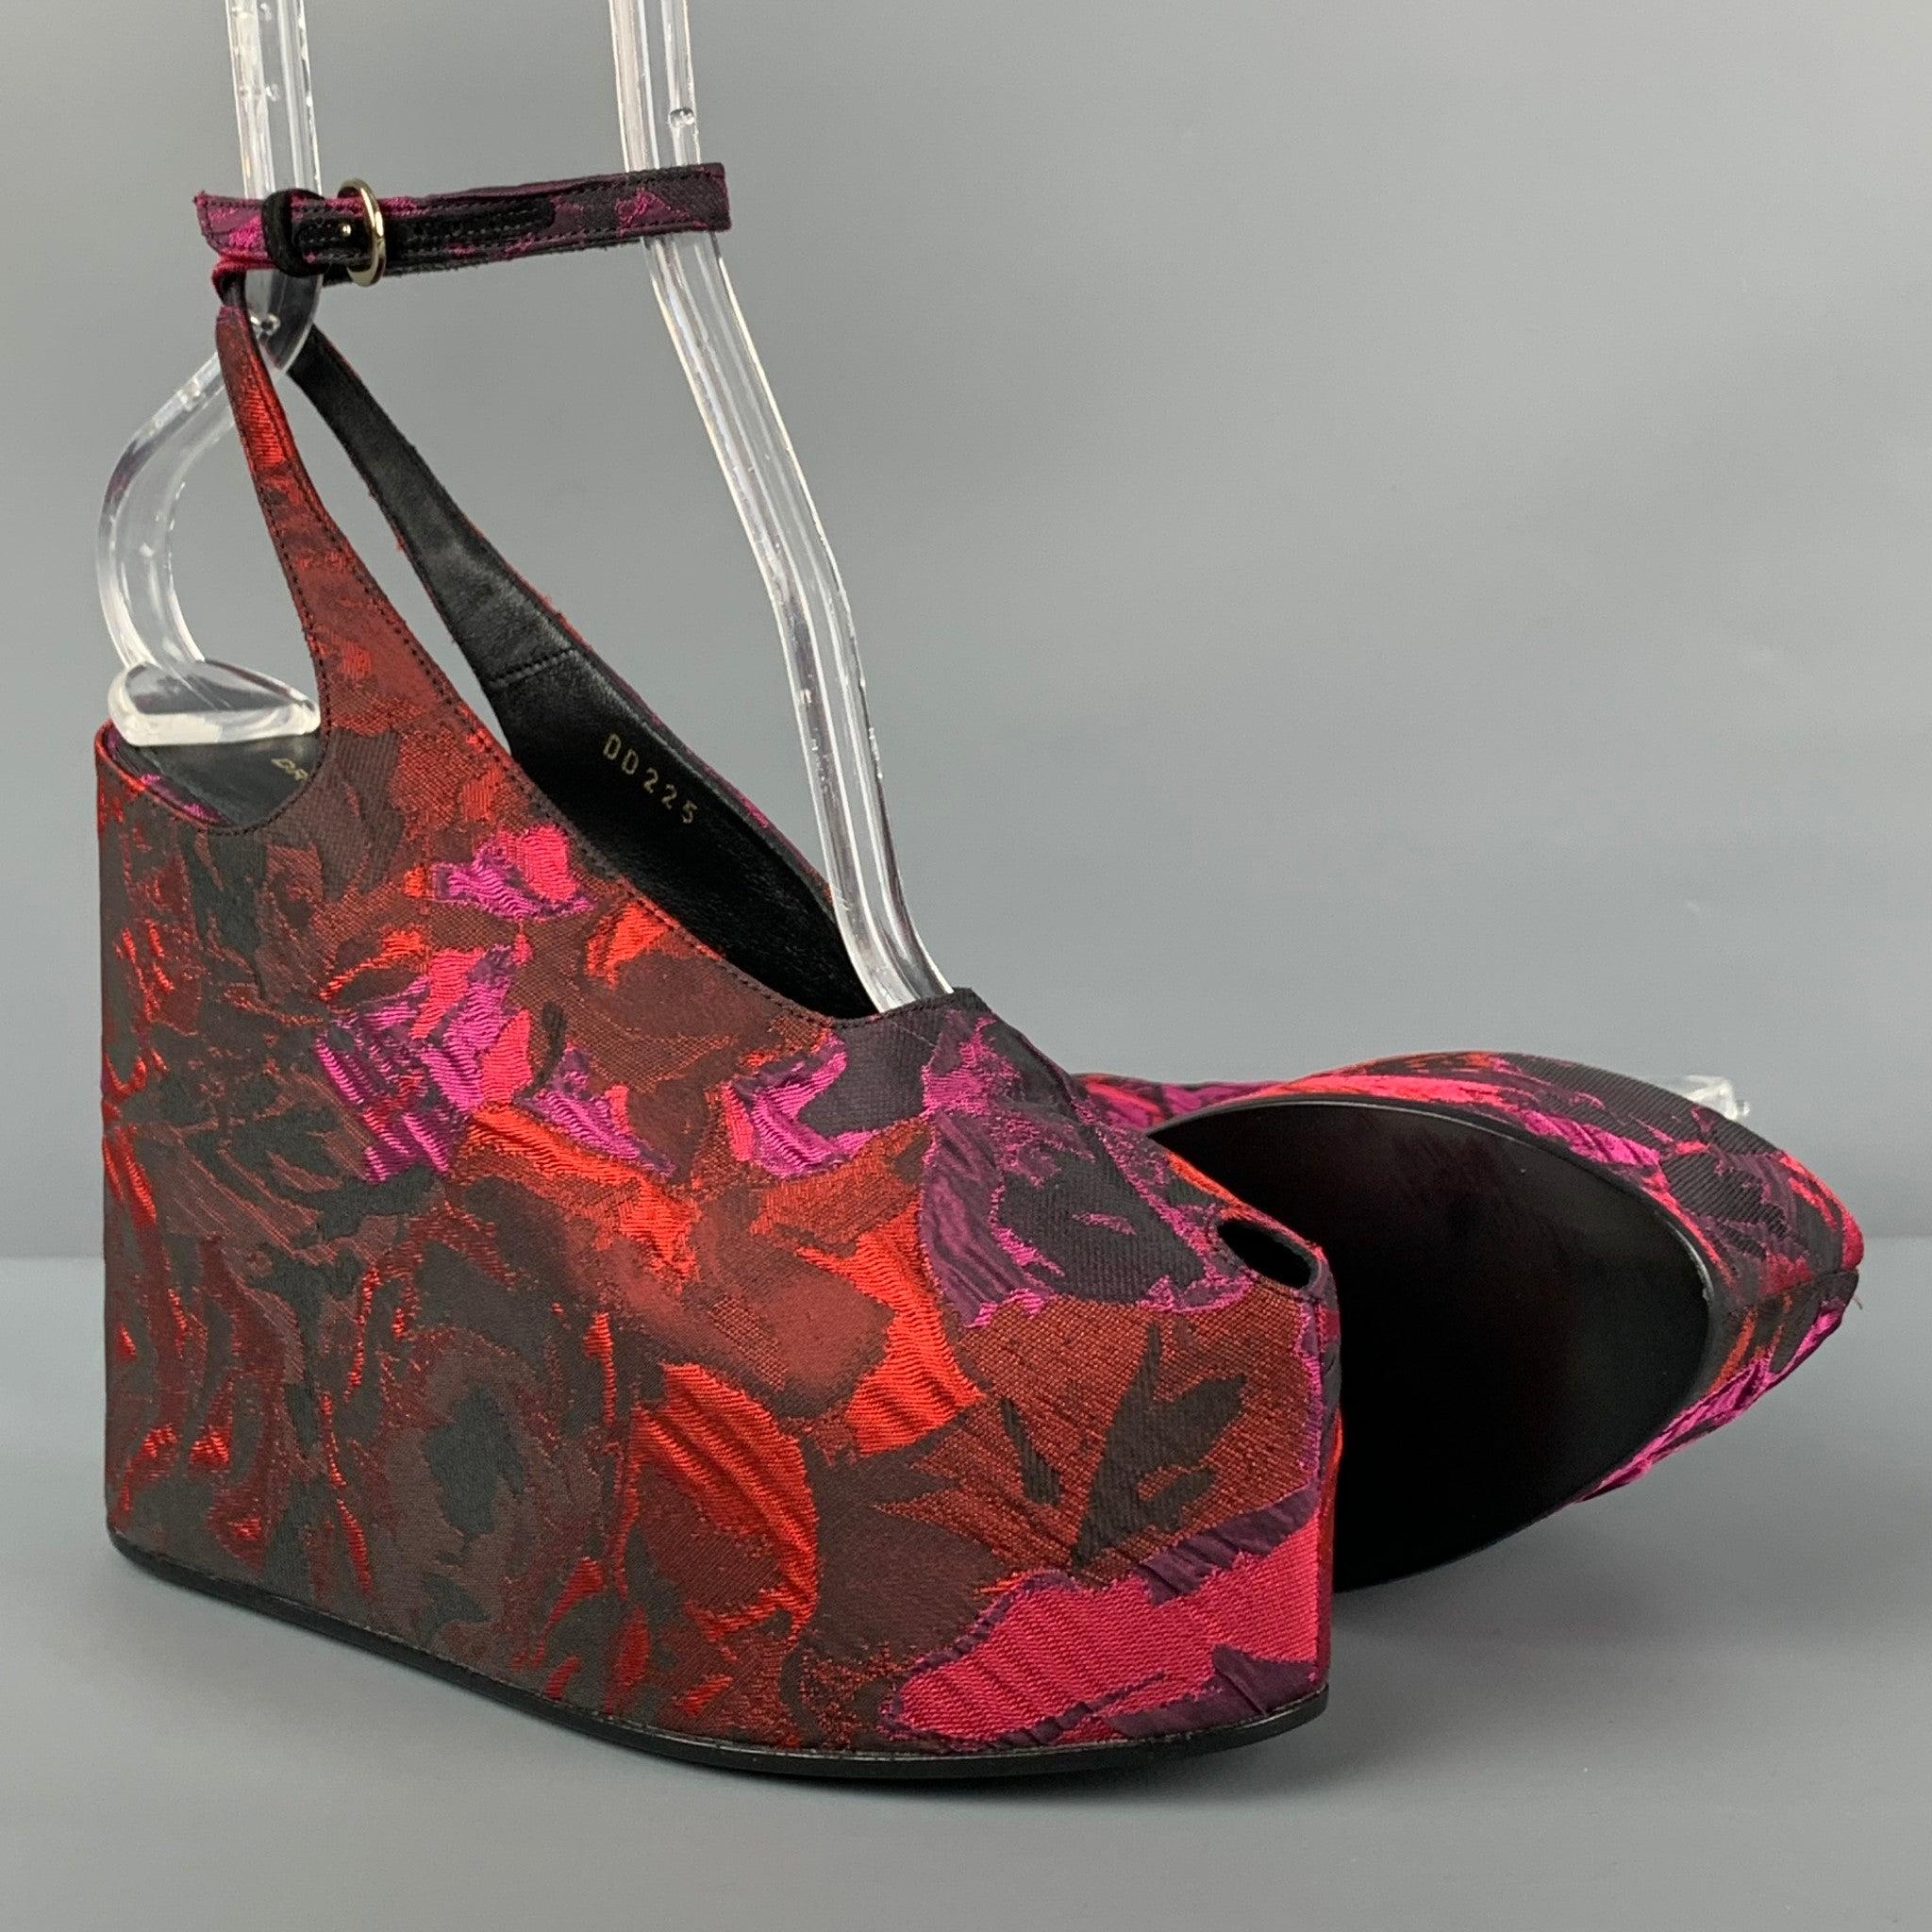 DRIES VAN NOTEN Size 7.5 Red Black Floral Jacquard Platform Wedge Pumps In Good Condition For Sale In San Francisco, CA